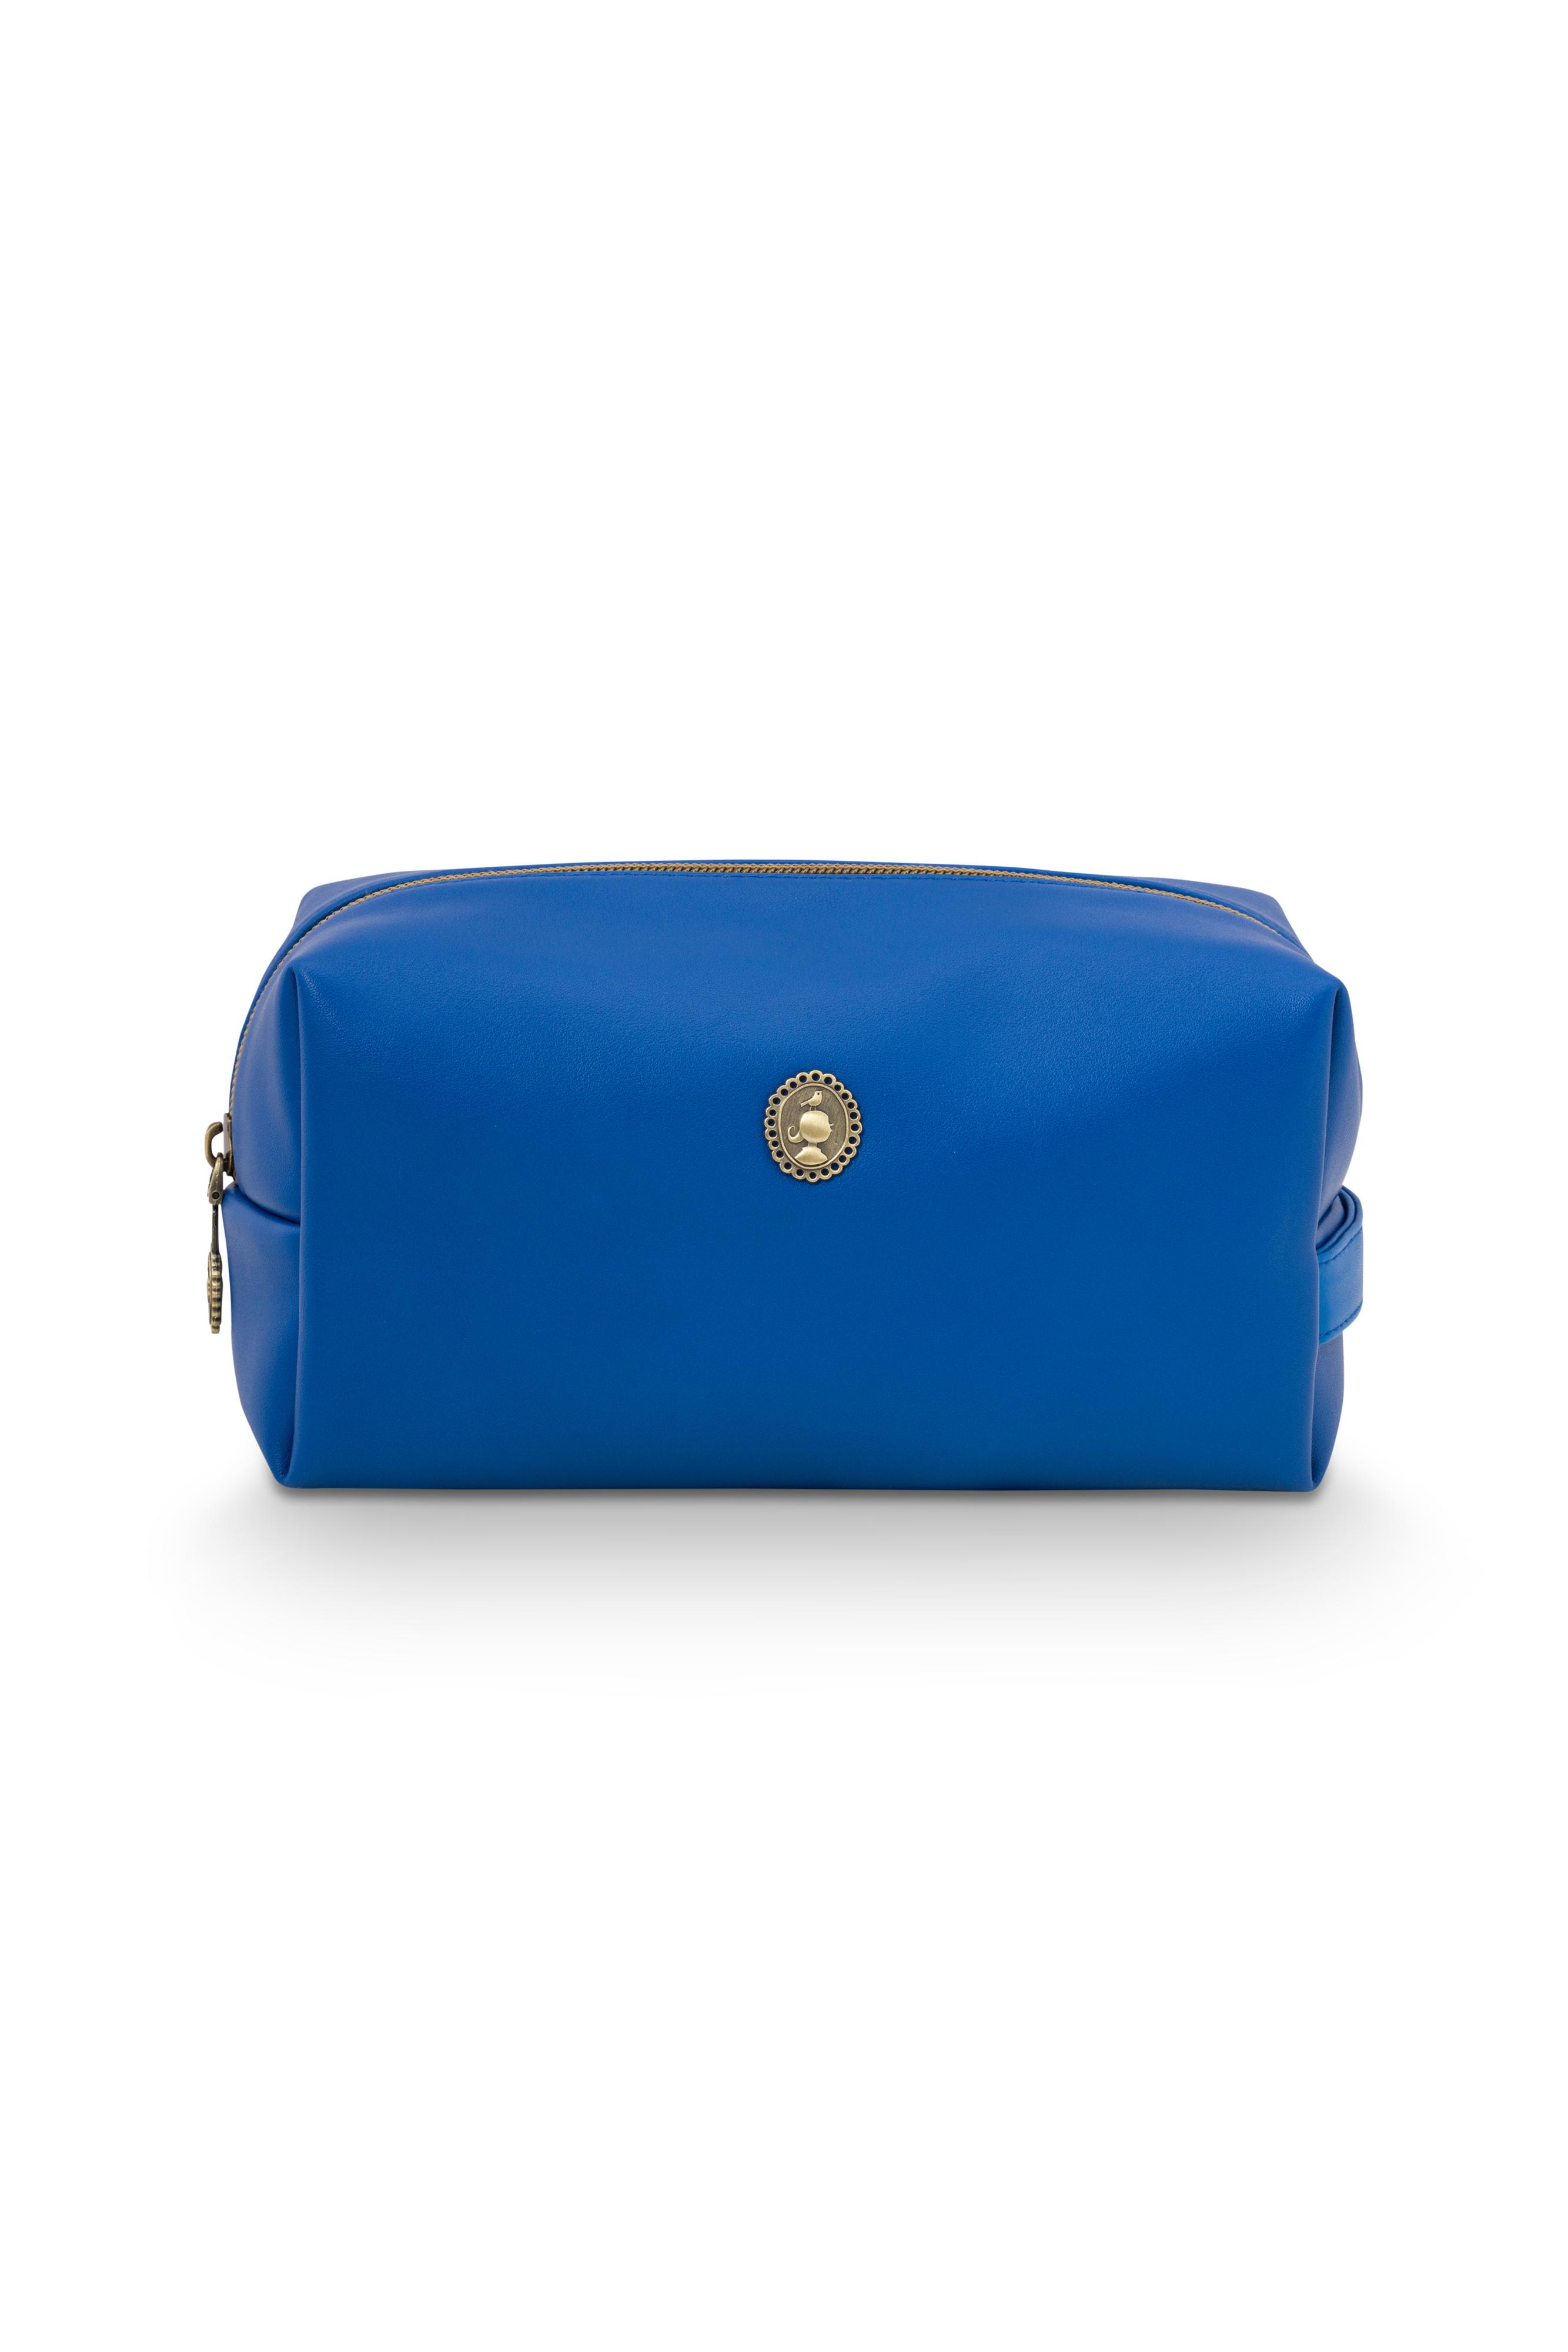 Coco Cosmetic Bag Large Blue 26x12.6x12cm Gift